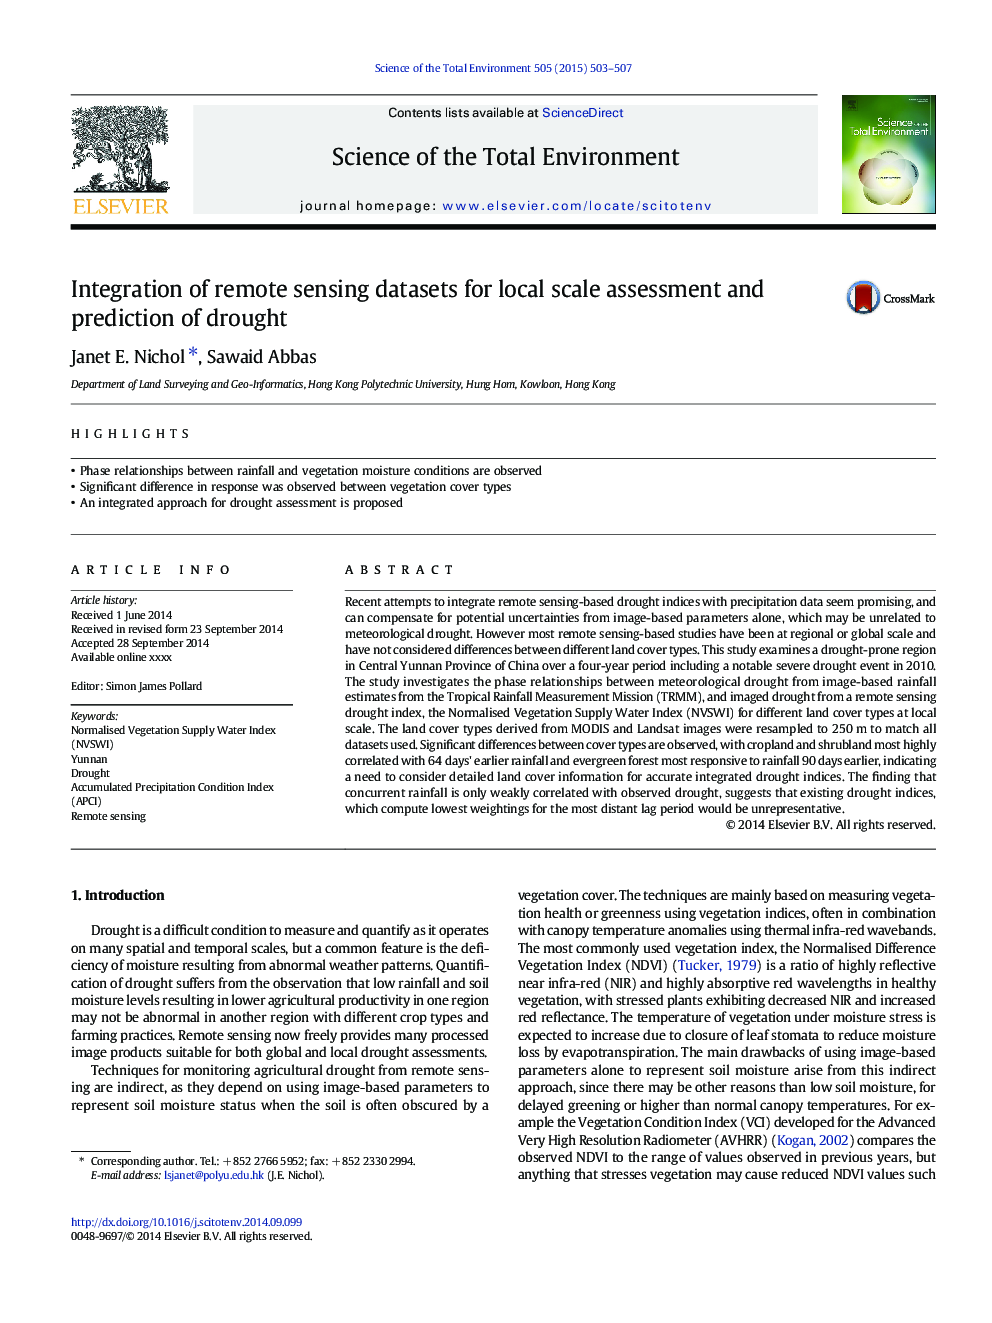 Integration of remote sensing datasets for local scale assessment and prediction of drought